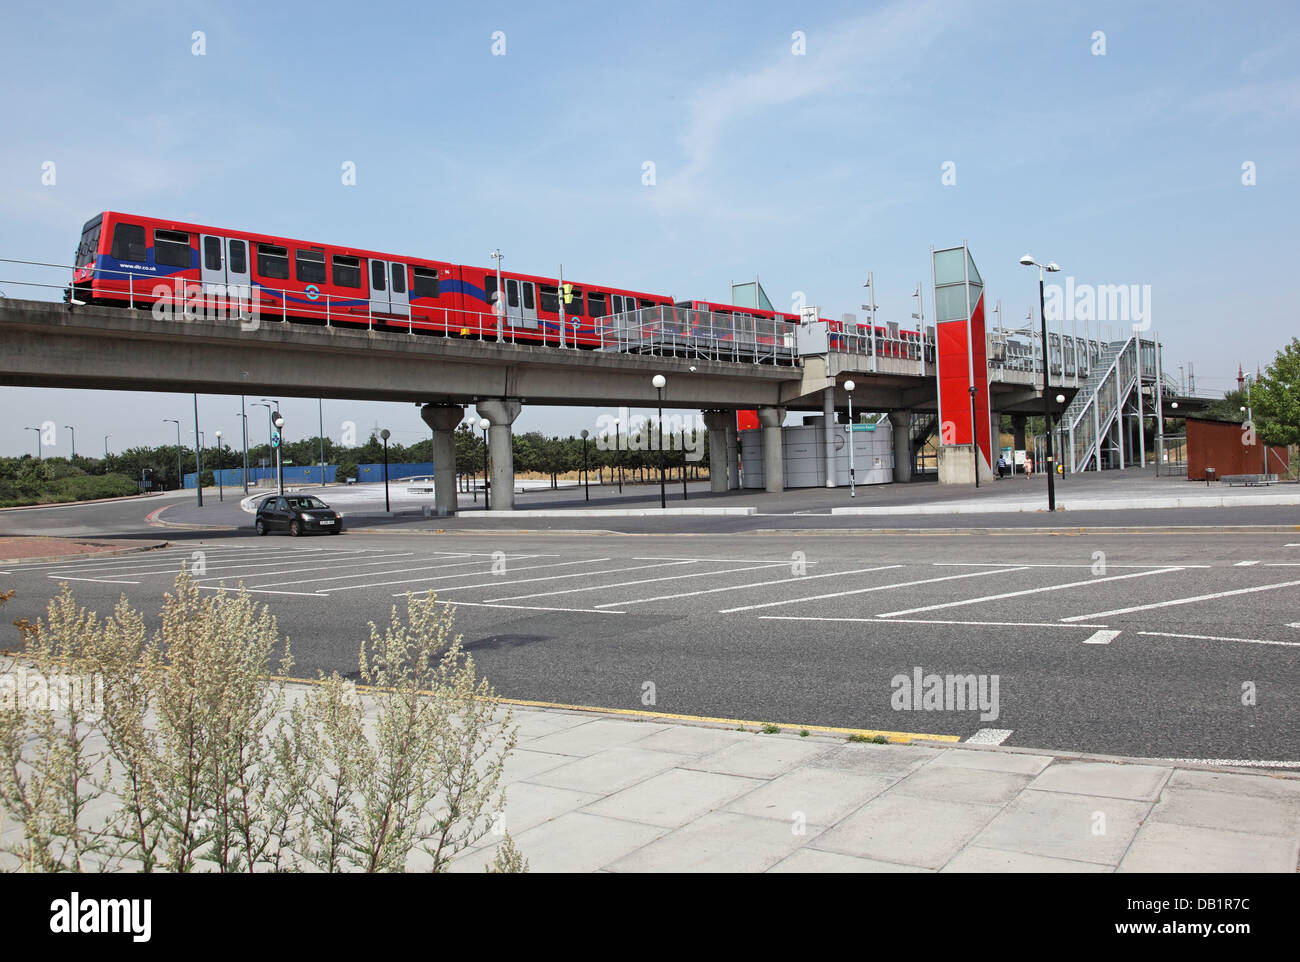 A London Docklands Light Railway train departs from Gallions Reach station in Beckton, east London, UK Stock Photo